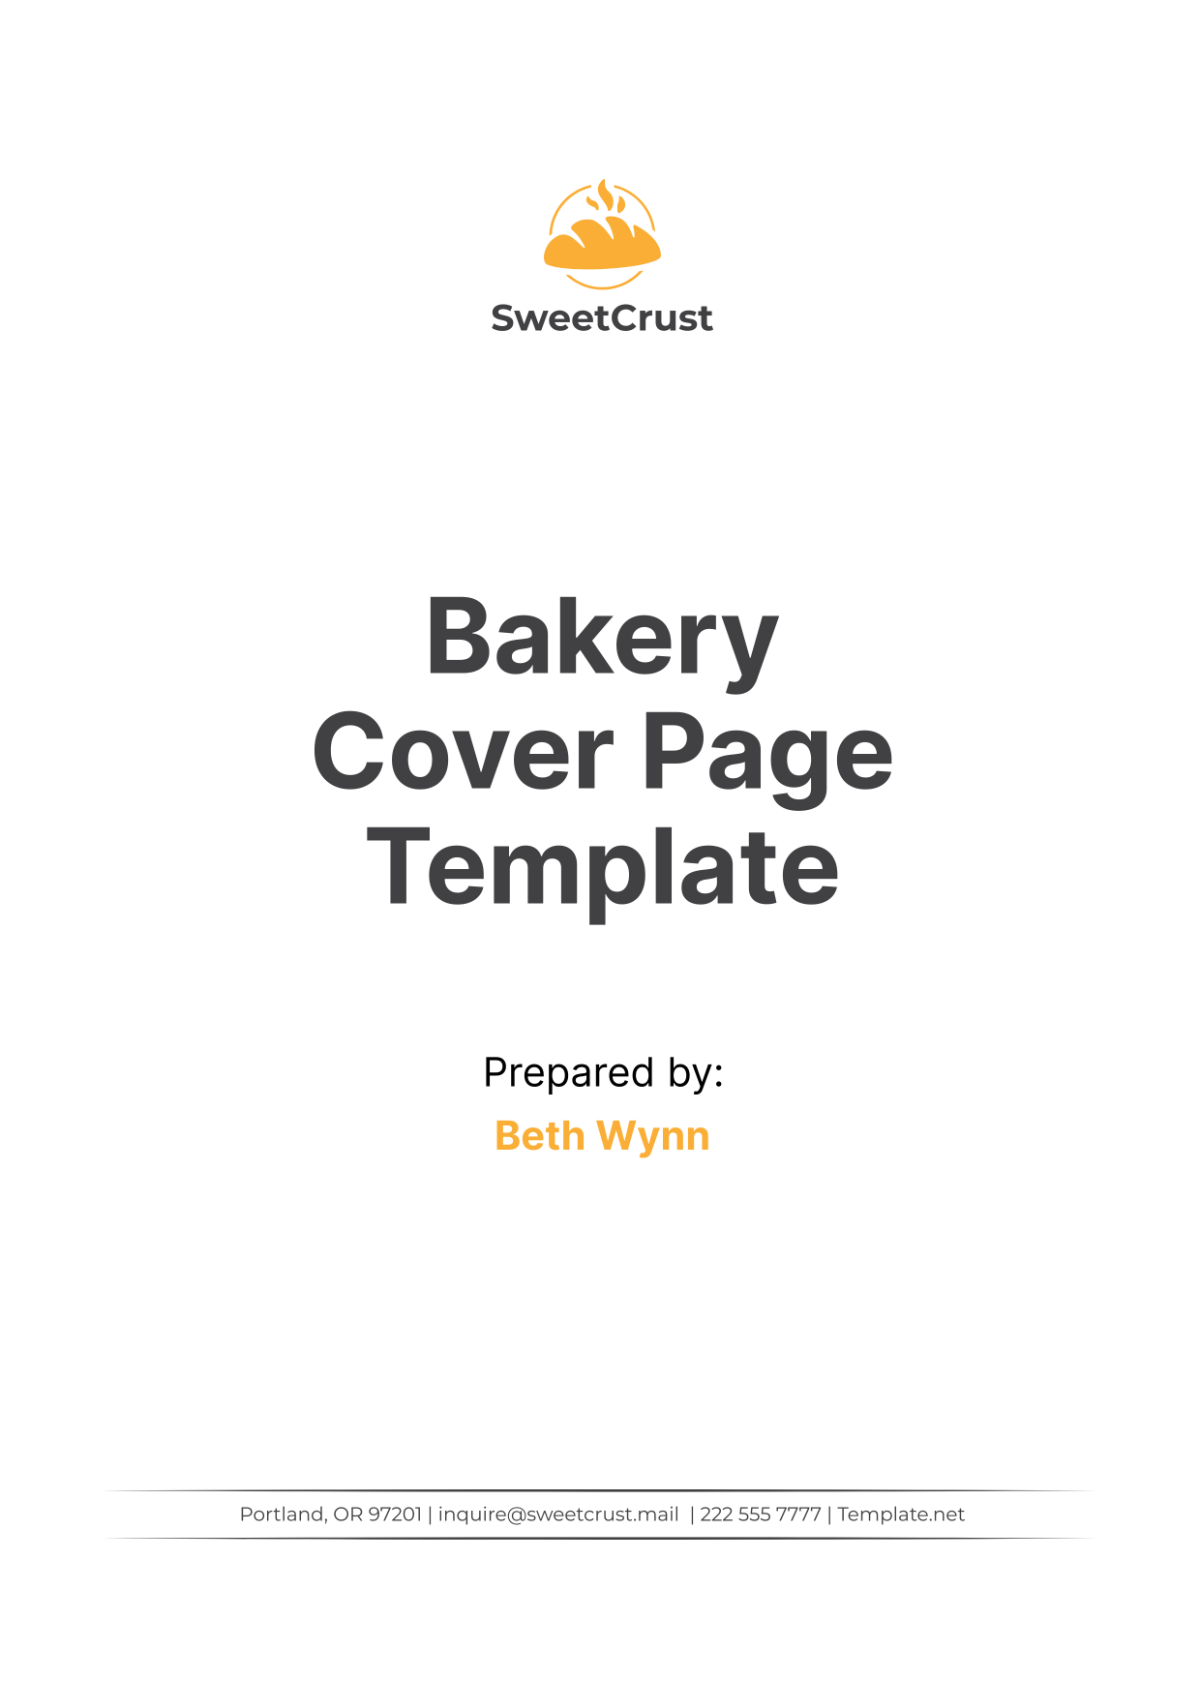 Bakery Cover Page